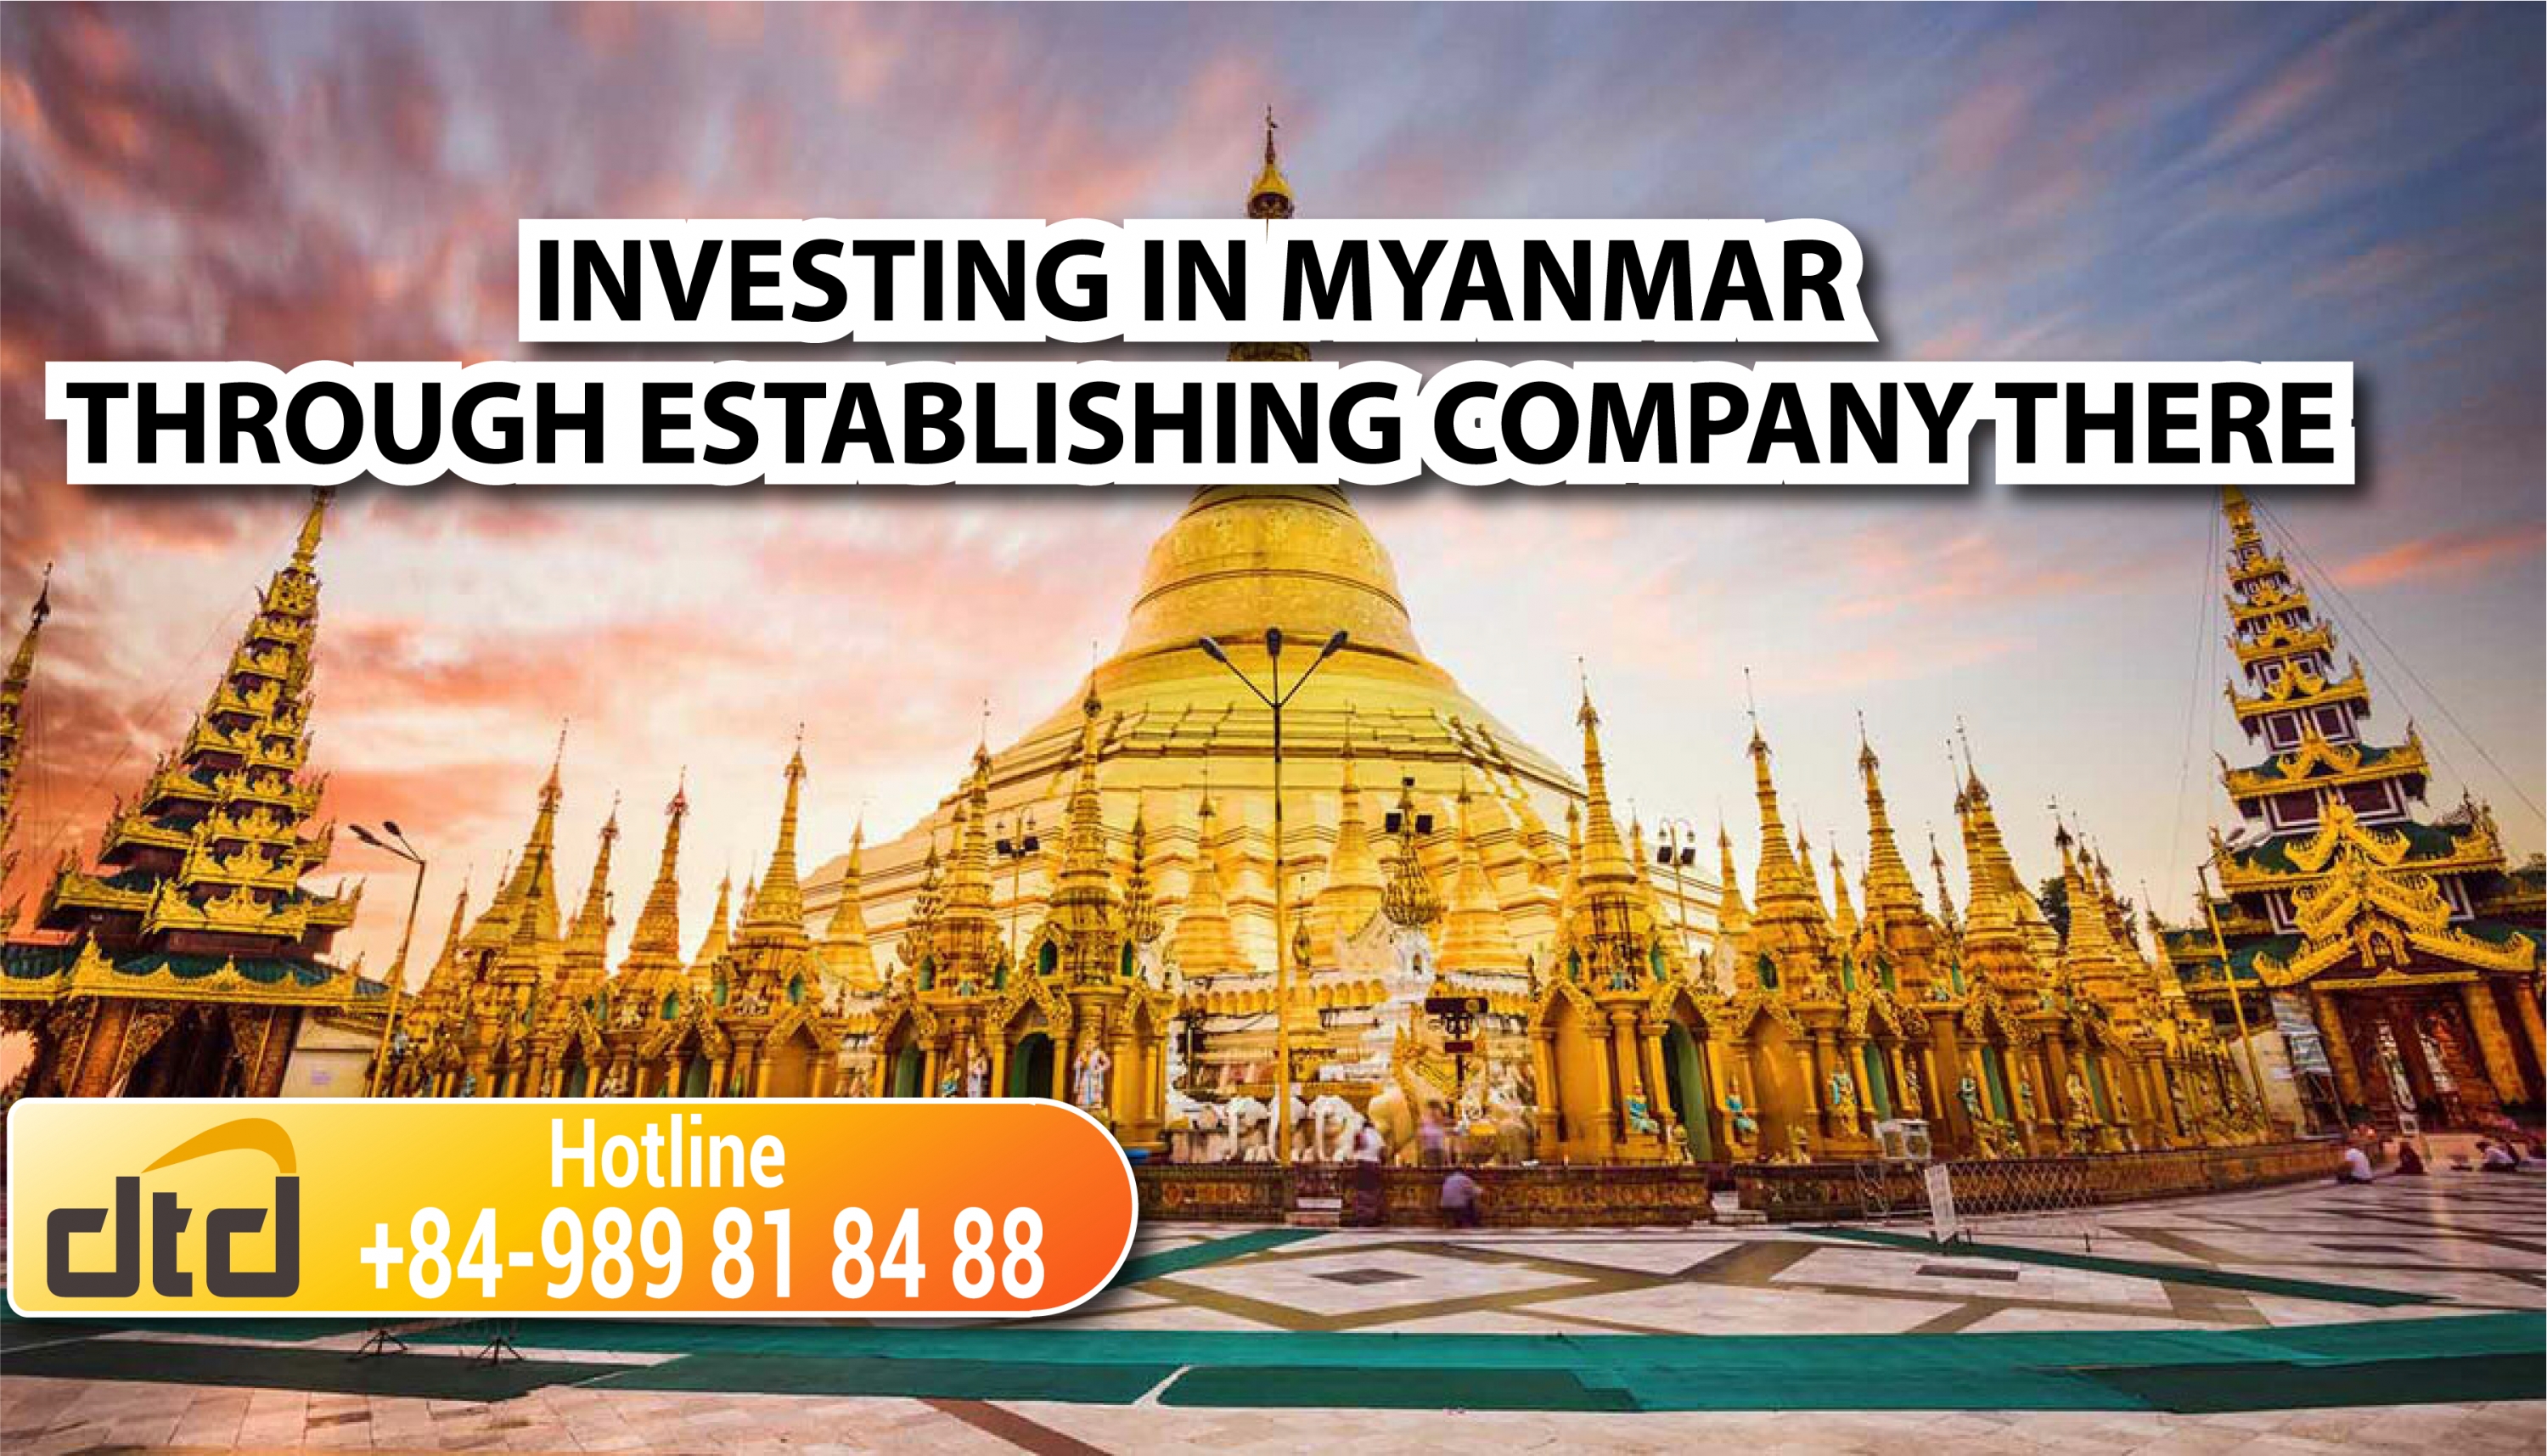 INVESTING IN MYANMAR THROUGH ESTABLISHING COMPANY THERE